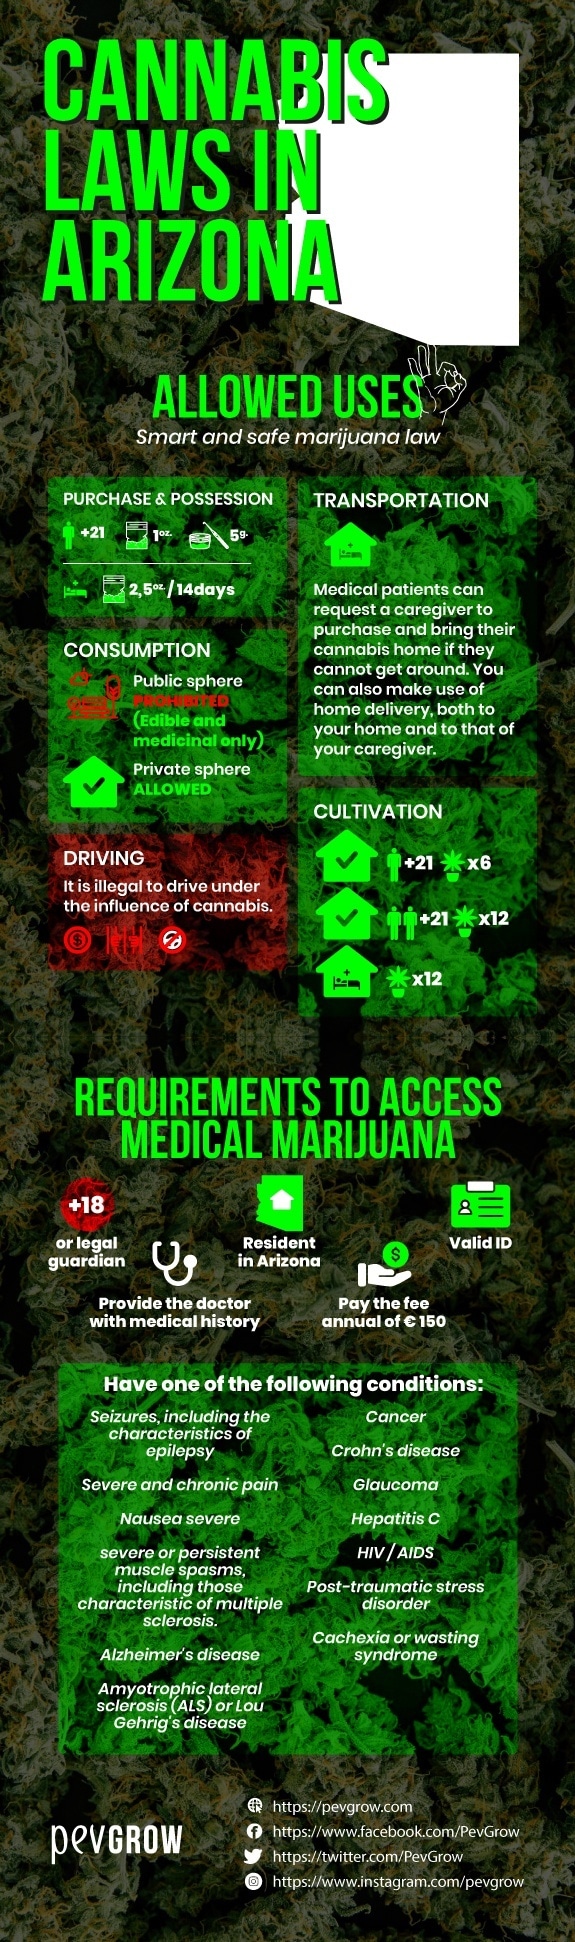 Arizona Cannabis Laws and Permitted Uses